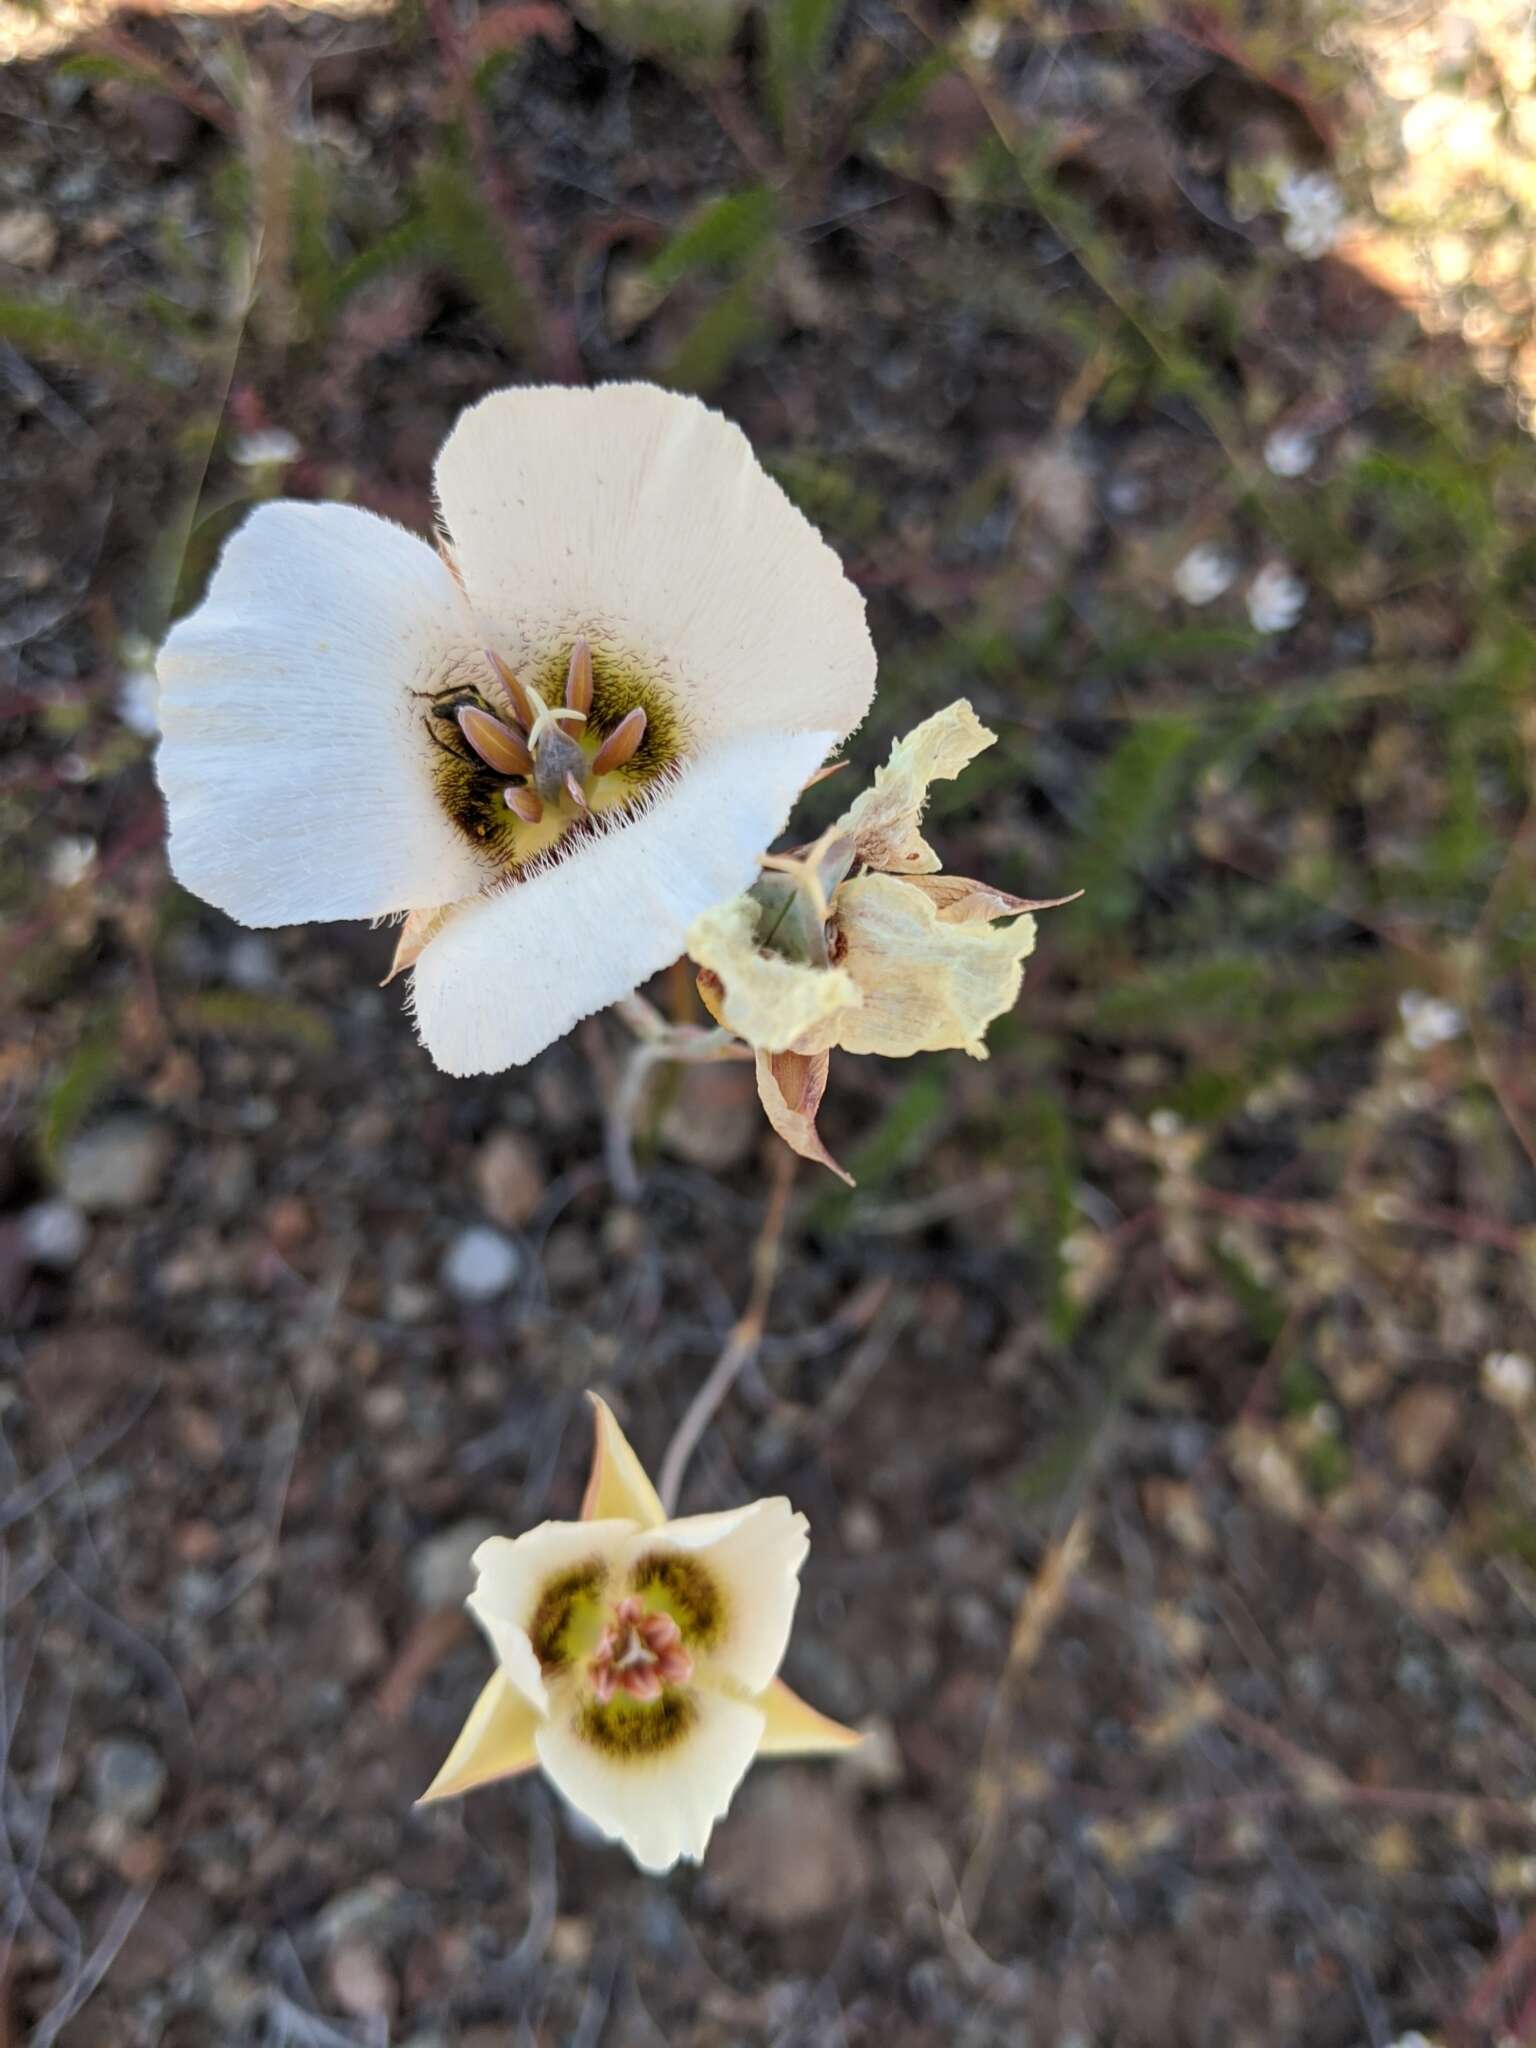 Image of Howell's mariposa lily